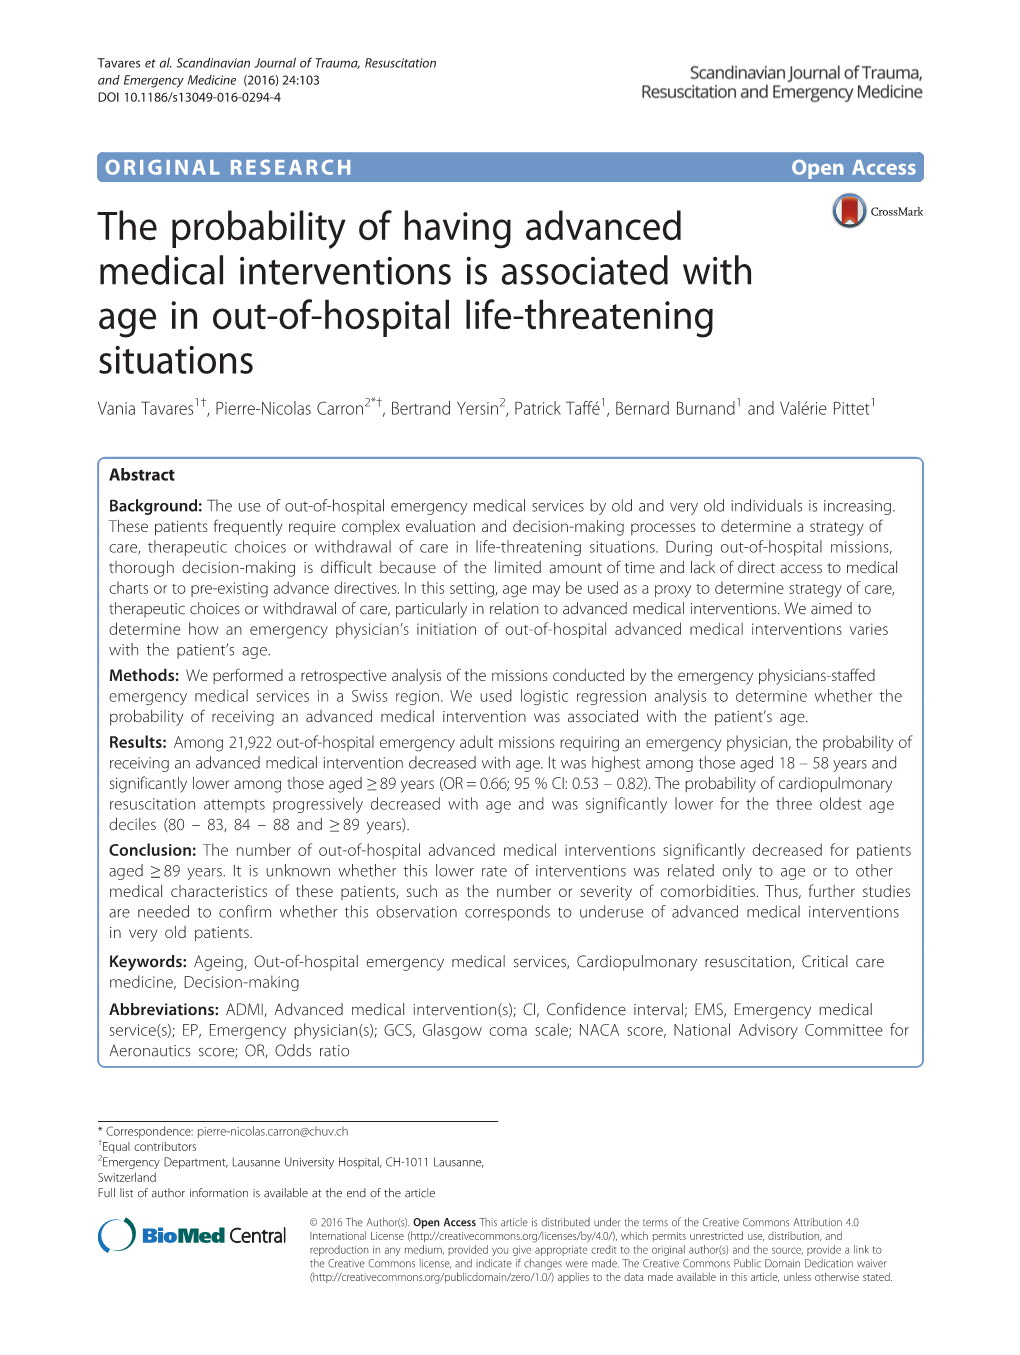 The Probability of Having Advanced Medical Interventions Is Associated